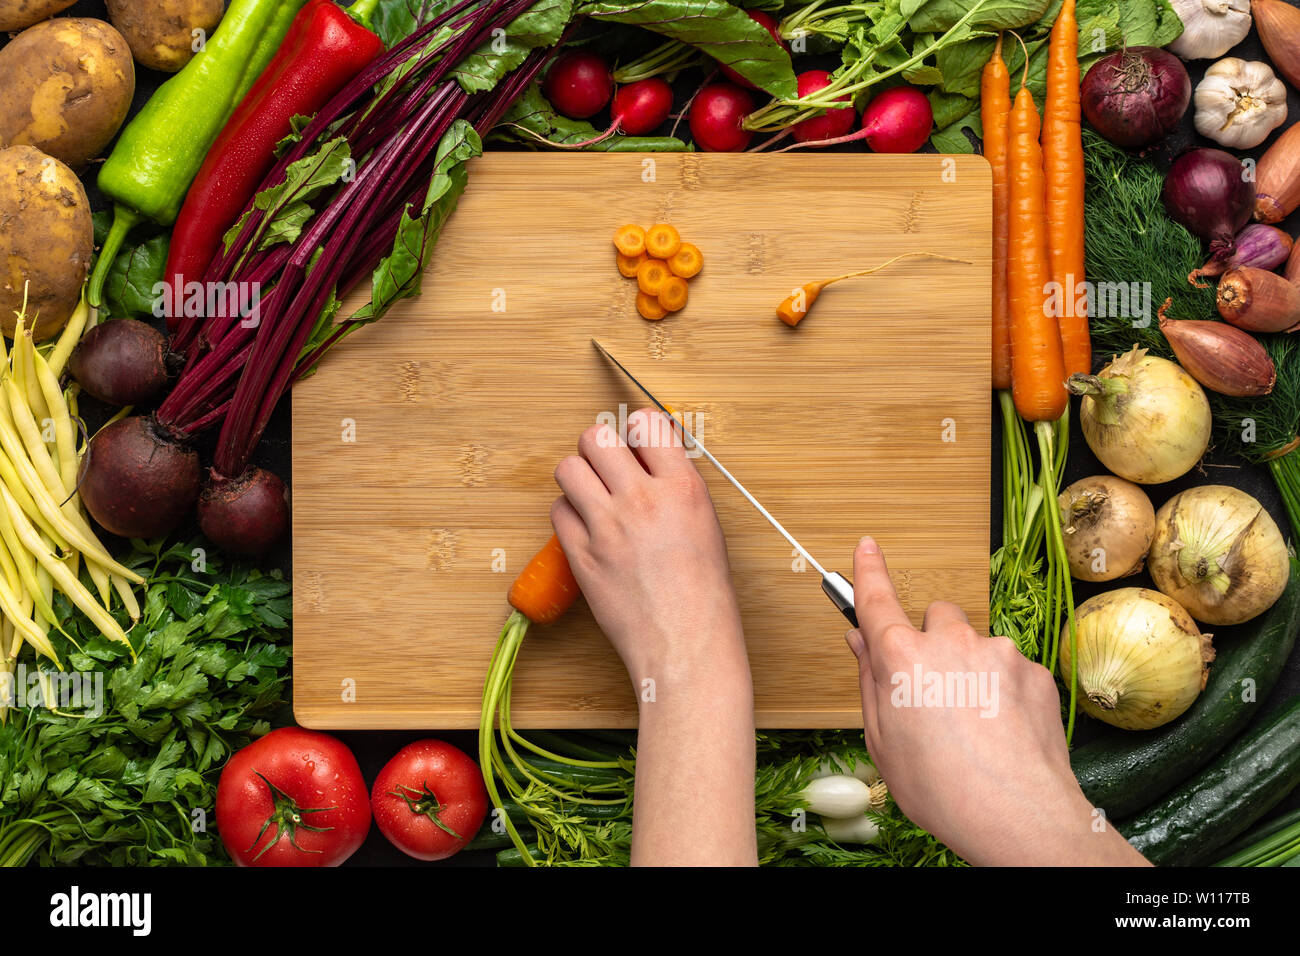 Female Hands Cutting Organic Carrot with Chef Knife on Wooden Chopping Board. Healthy Vegetarian Food Concept. Stock Photo